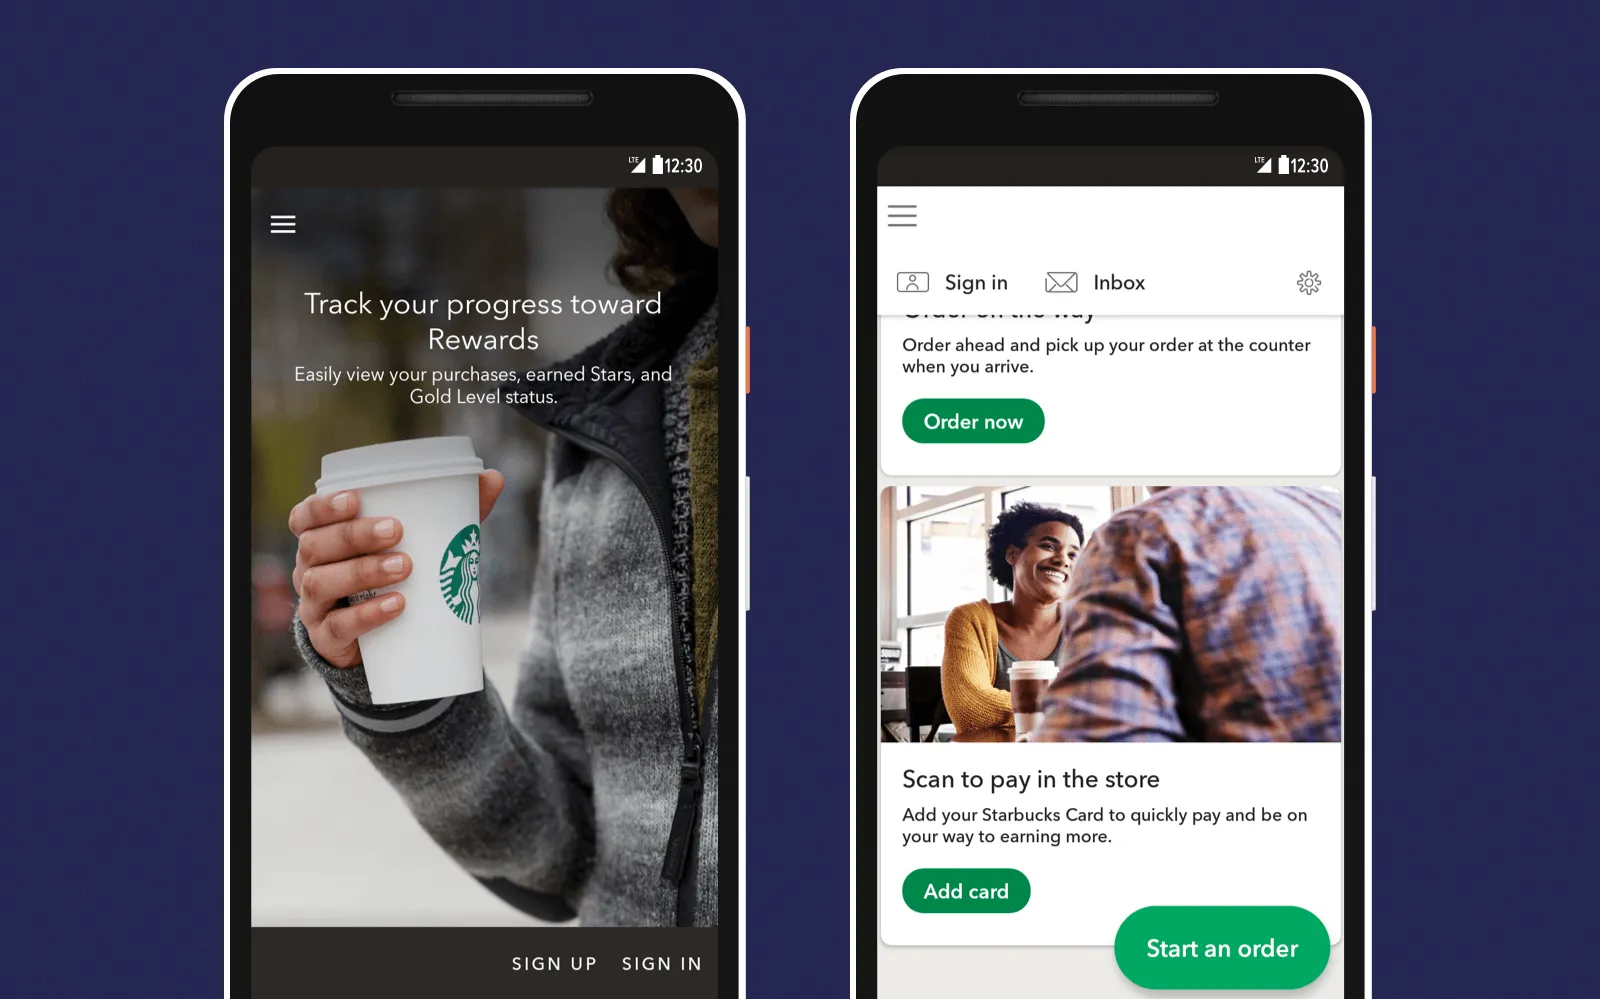 Starbucks is a personalized app that improves the Starbucks cafes experience